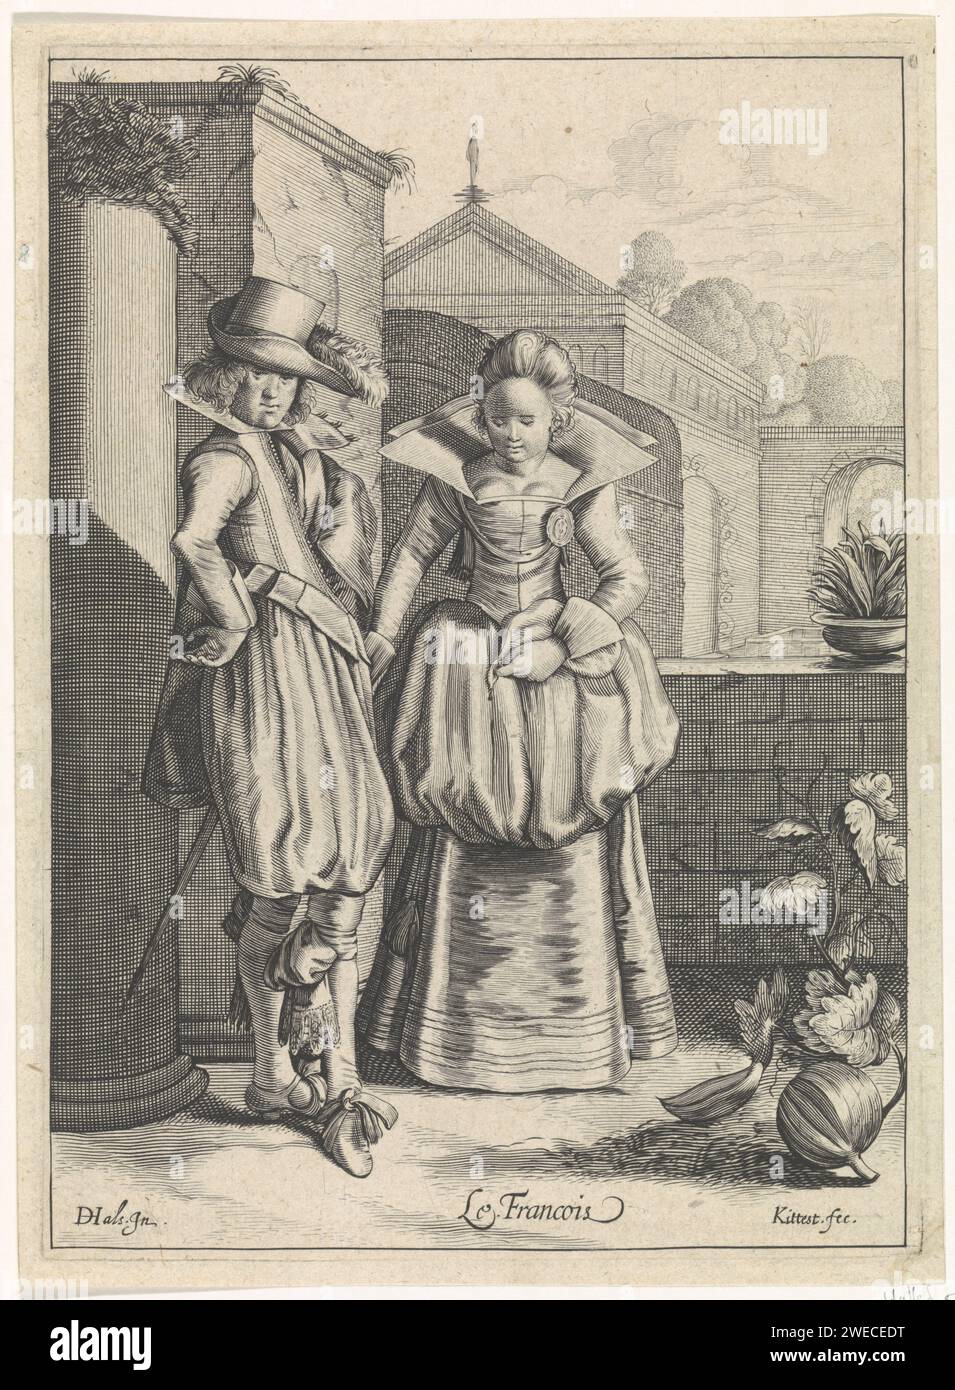 Elegant pair in French clothing, Cornelis van Kittensteyn, After Dirck Hals, 1615 - 1625  On a landing in front of a castle is an elegant pair in French fashion of approx. 1620. The top skirt of the woman is, very fashionable, half suspended. In front of them is a pumpkin plant with a pumpkin. The print is part of a series with six prints about costumes in Europe. Netherlands paper engraving clothes, costume (+ men's clothes). clothes, costume (+ women's clothes). folk costume, regional costume. Europeans (with NAME). plants and herbs. head-gear: hat (+ men's clothes). head-gear: hat (+ feathe Stock Photo